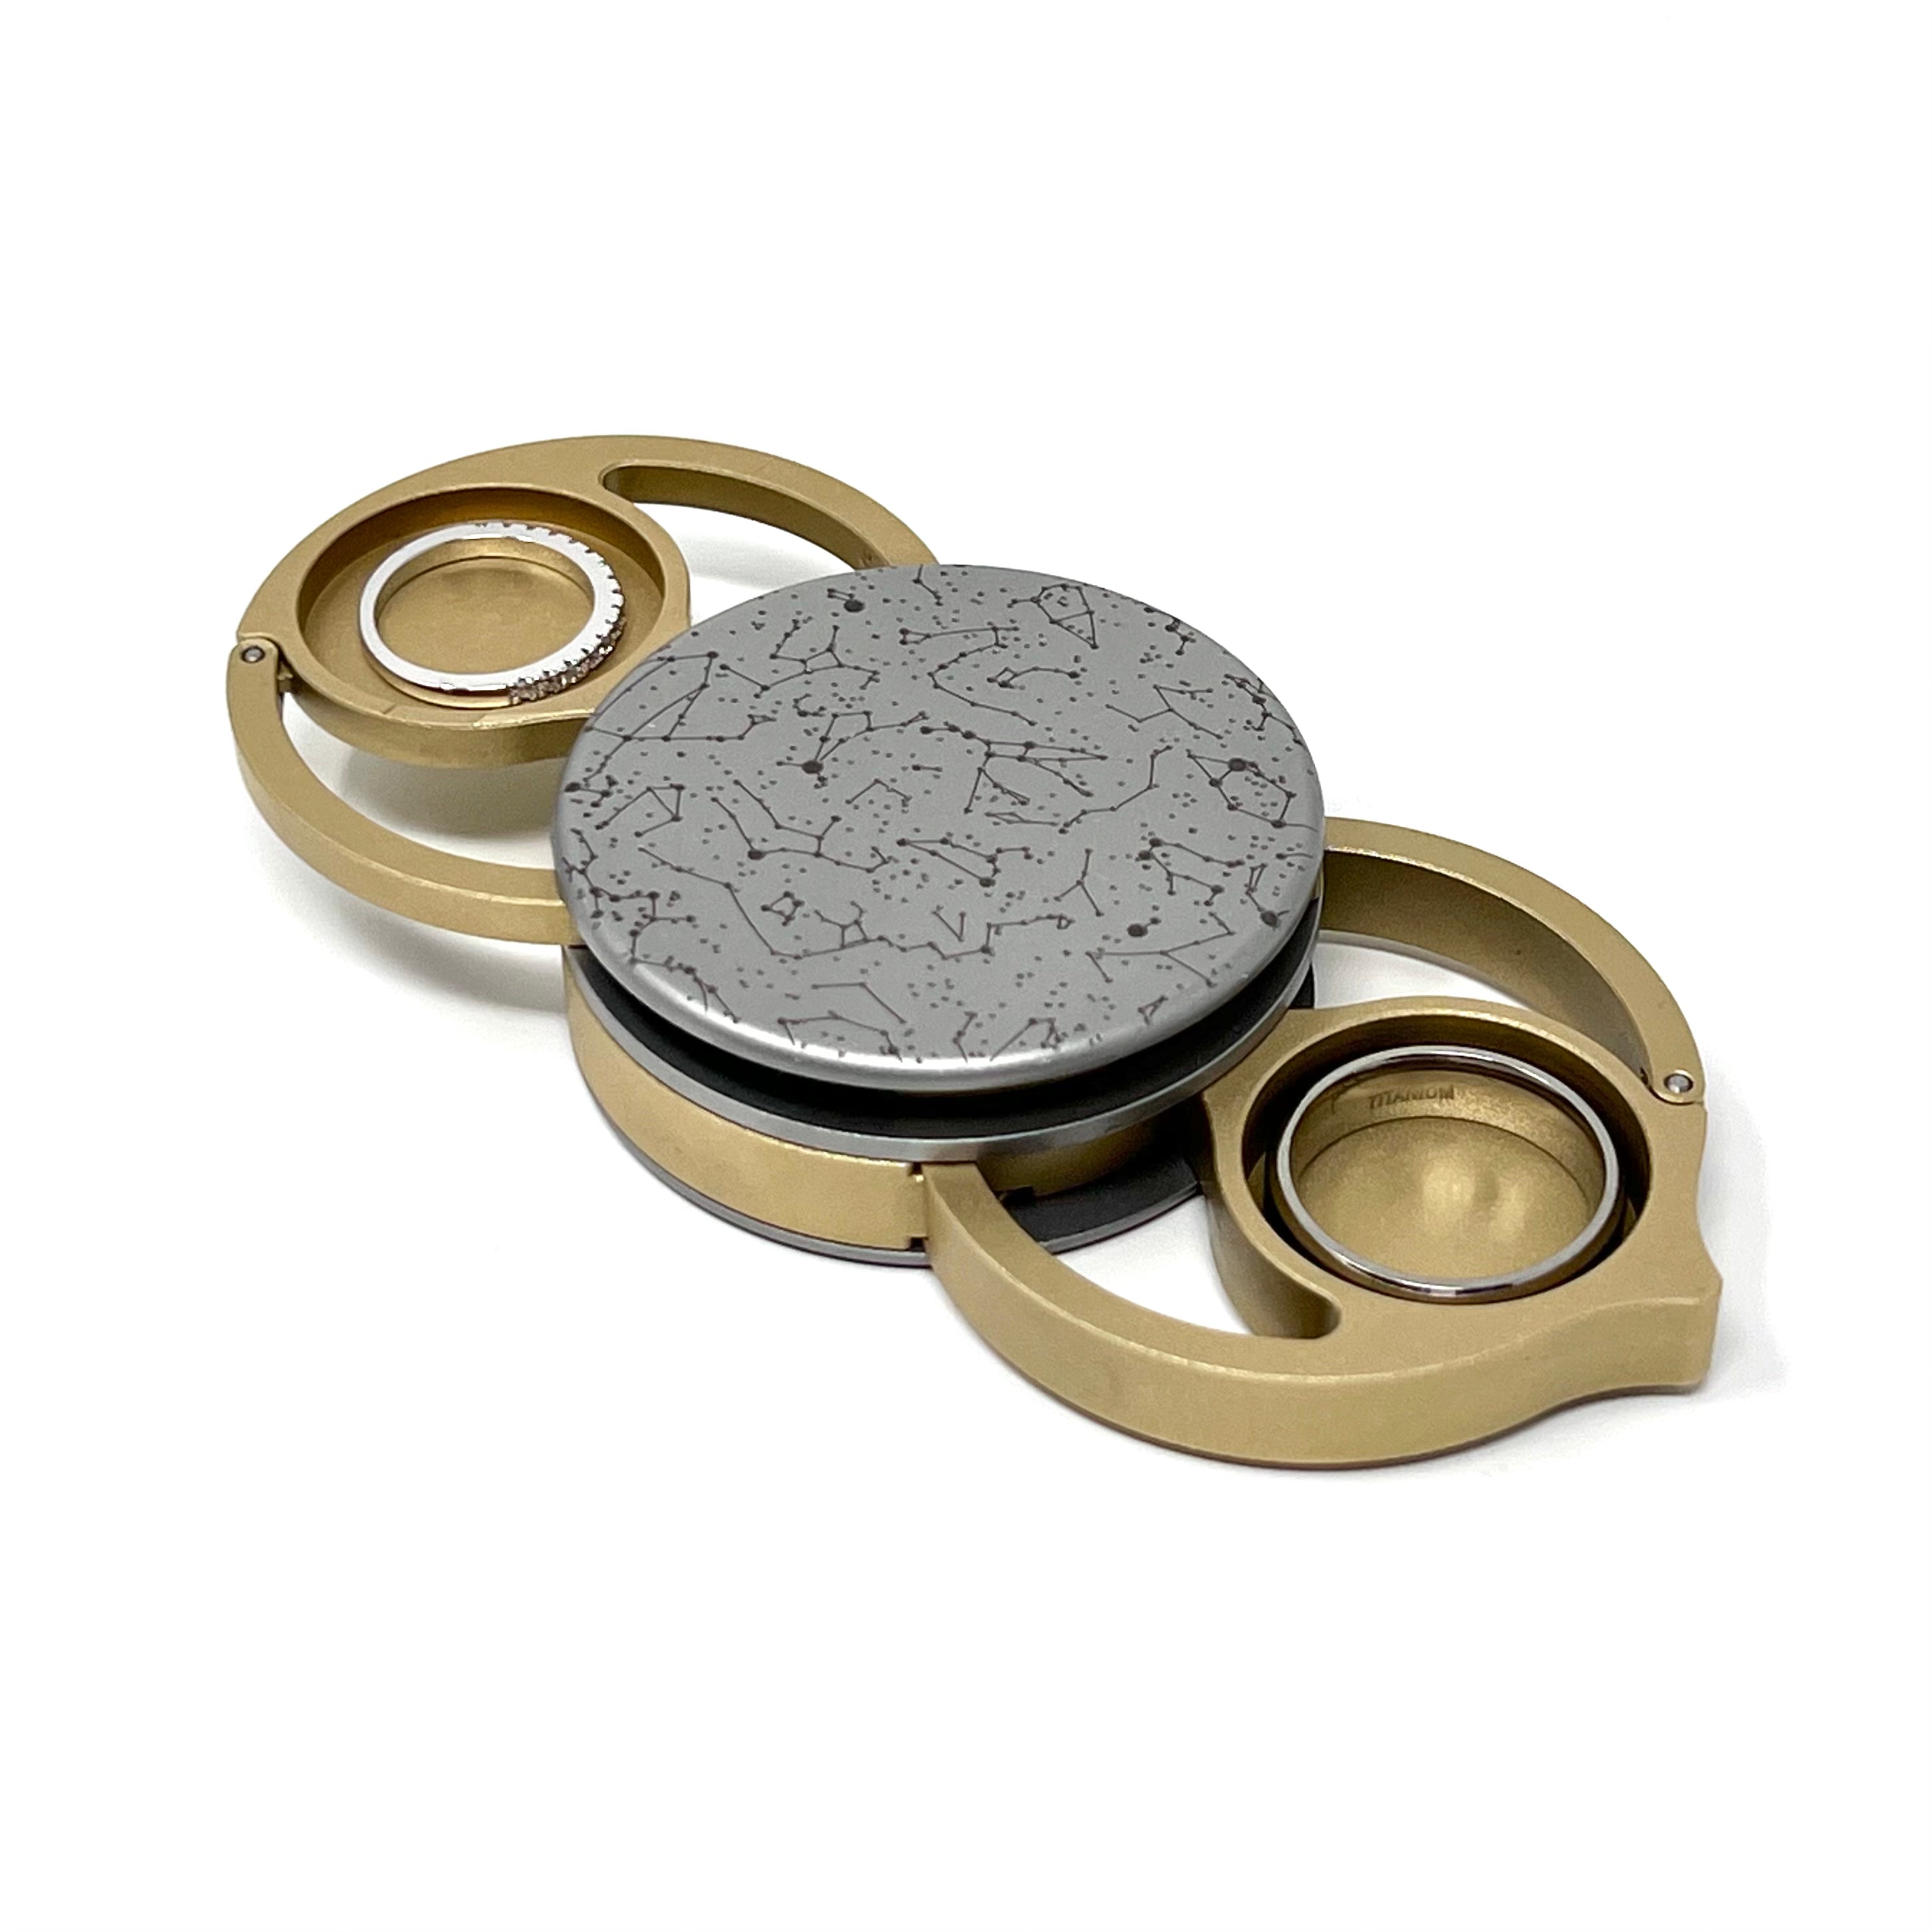 First Limited Edition Kinetadisc Duo Ring Box